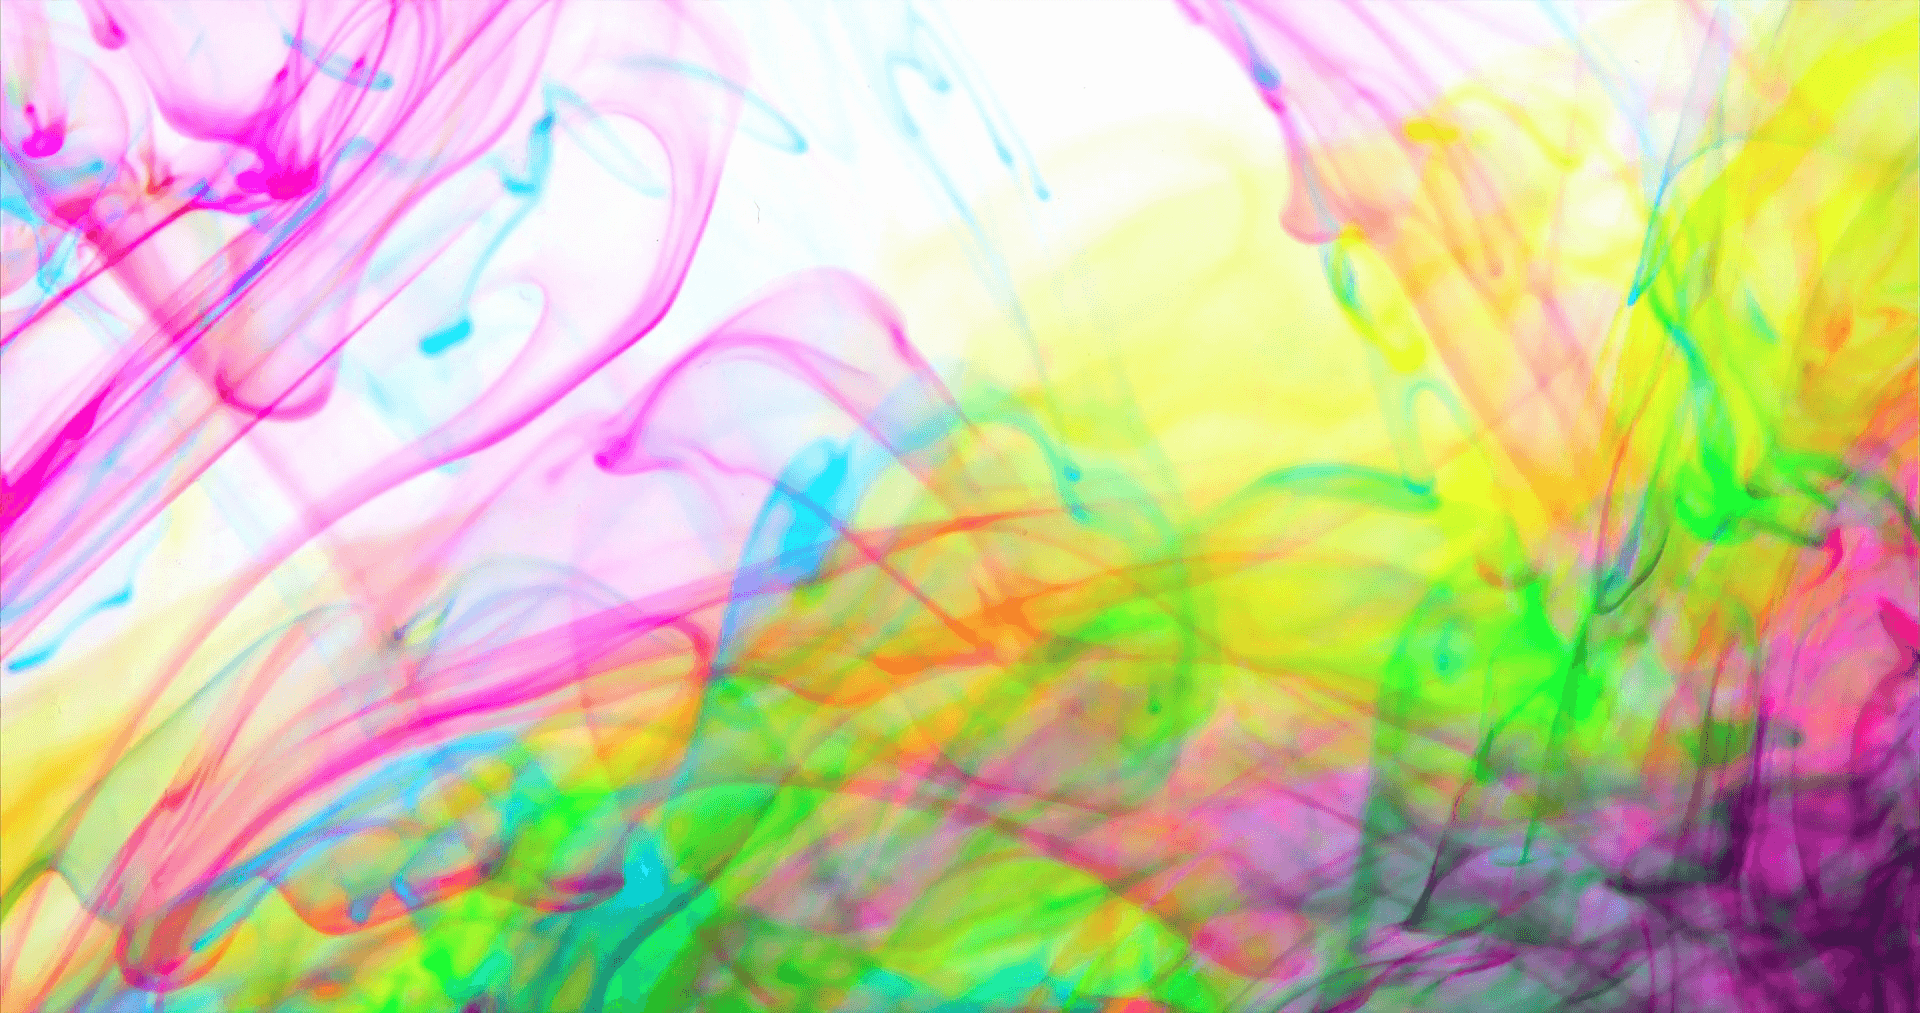 Neon colors mixing and swirling around. Fantastic abstract